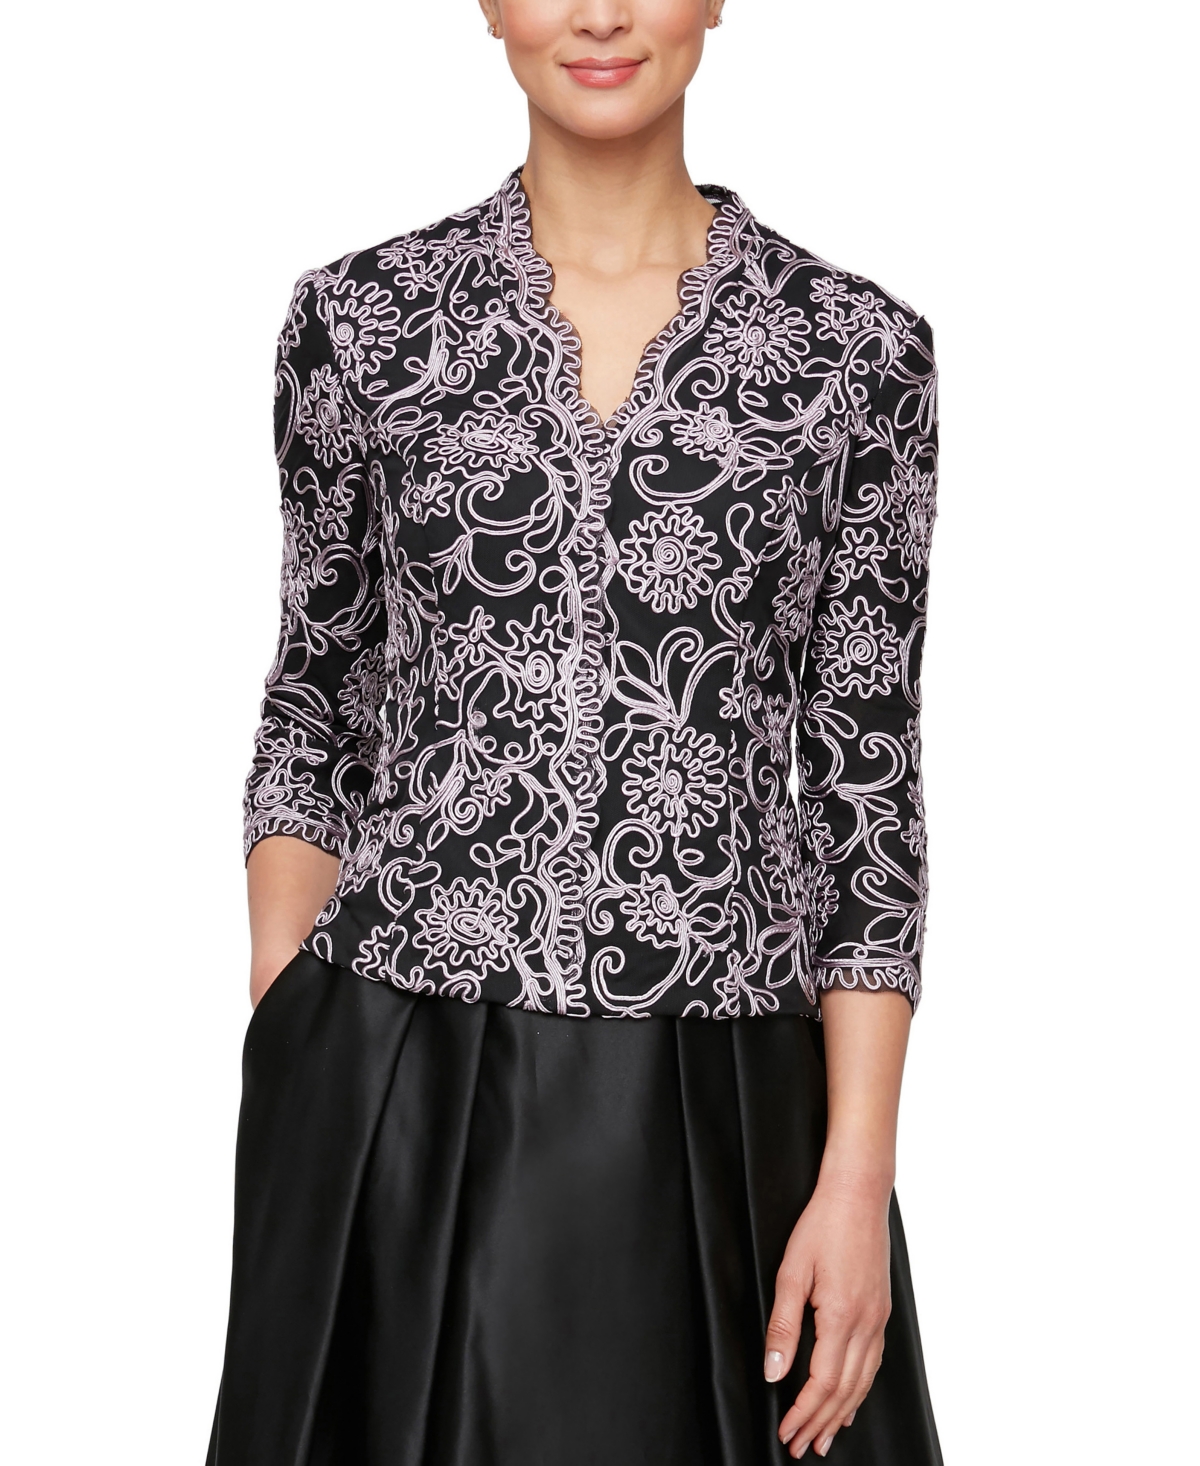 Women's 3/4-Sleeve Embroidered Blouse - Wisteria